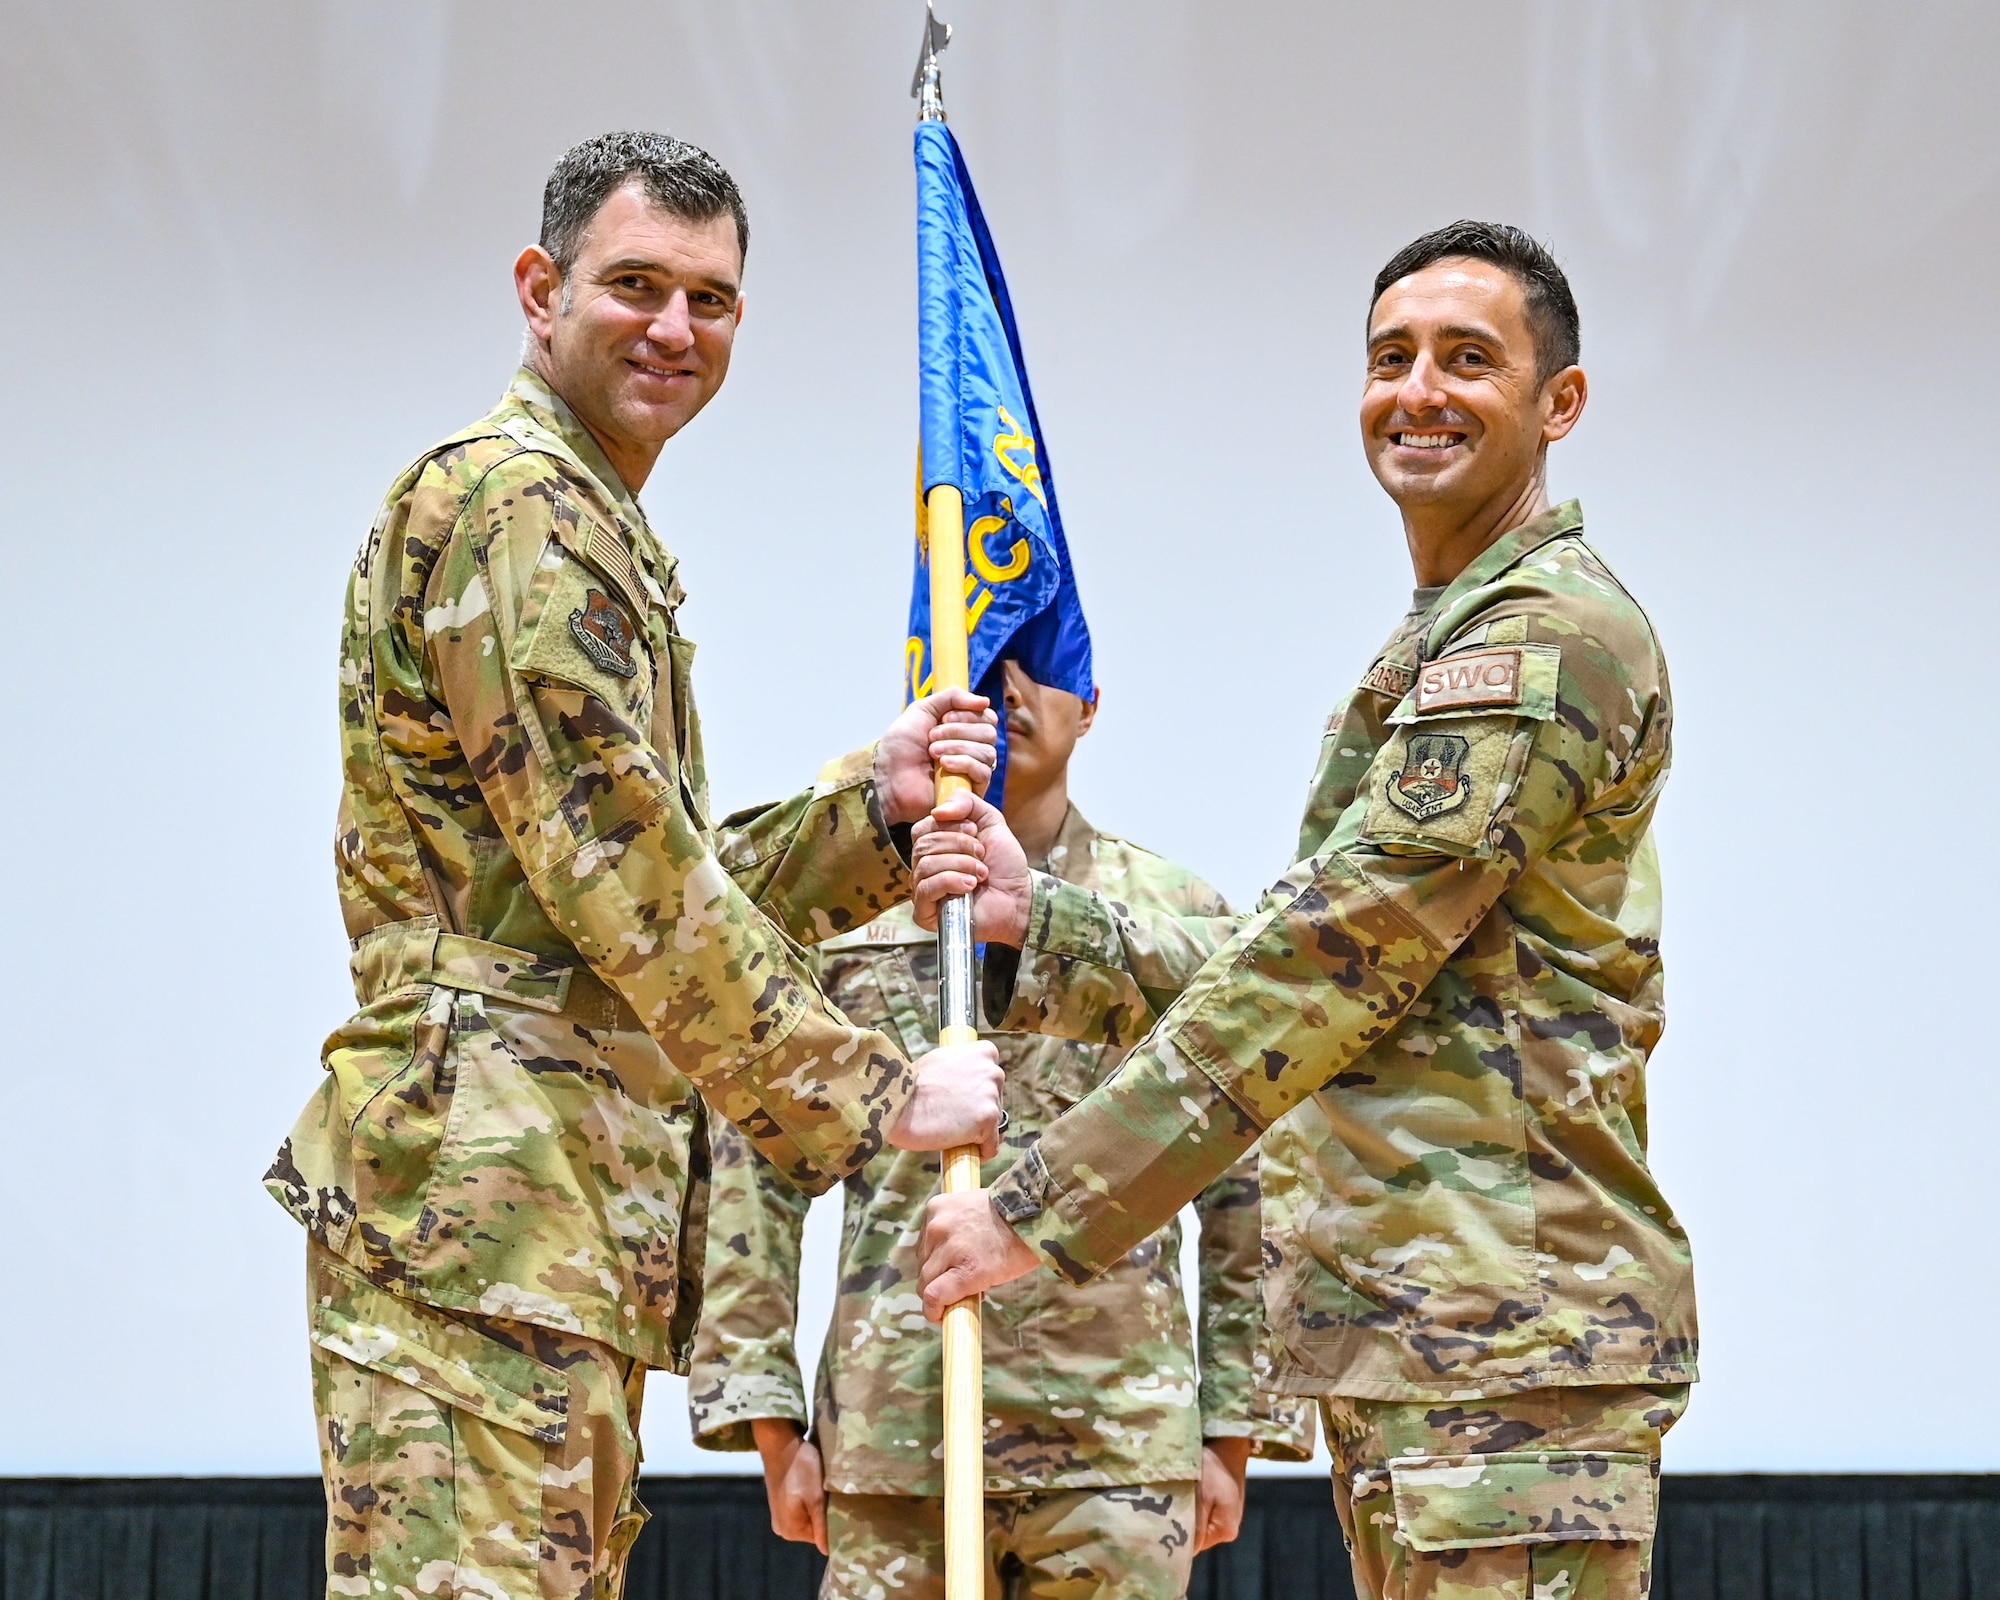 Col. Jeremy Ponn, 387th Air Expeditionary Group commander, passes the guidon to Lt. Col. Kyle Palmer, incoming 22nd Expeditionary Combat Weather Squadron commander, during a change of command ceremony at Ali Al Salem Air Base, Kuwait, June 7, 2023. The passing of the guidon symbolizes the passing of command from one commander to the next. (U.S. Air Force photo by Staff Sgt. Breanna Diaz)